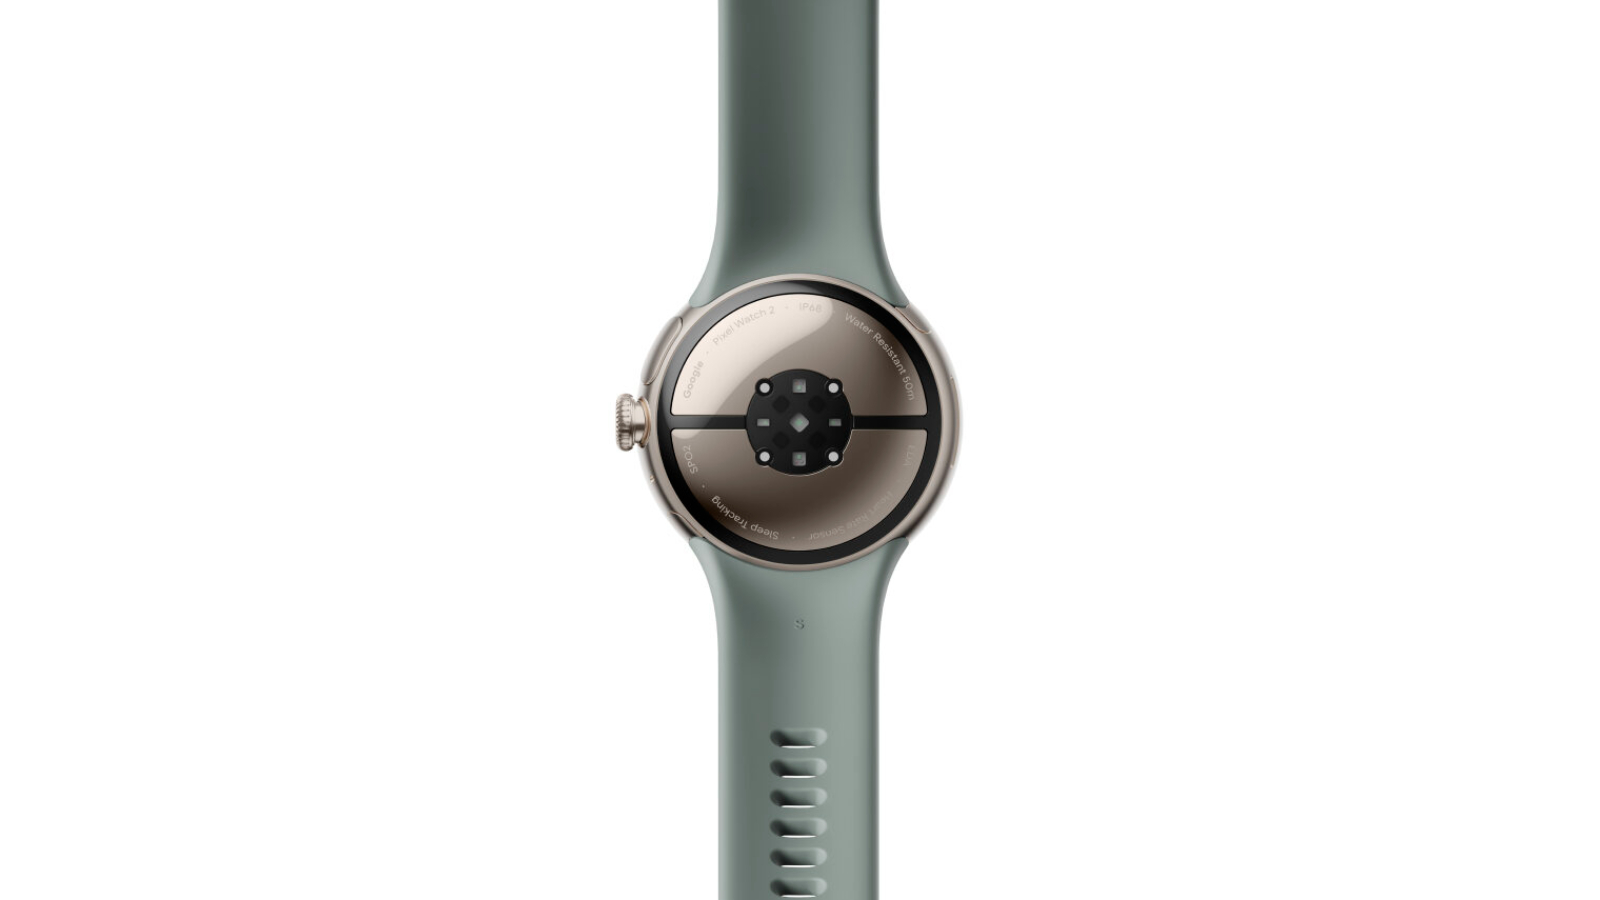 Pixel Watch 2 is the Fitness Watch - Google Store